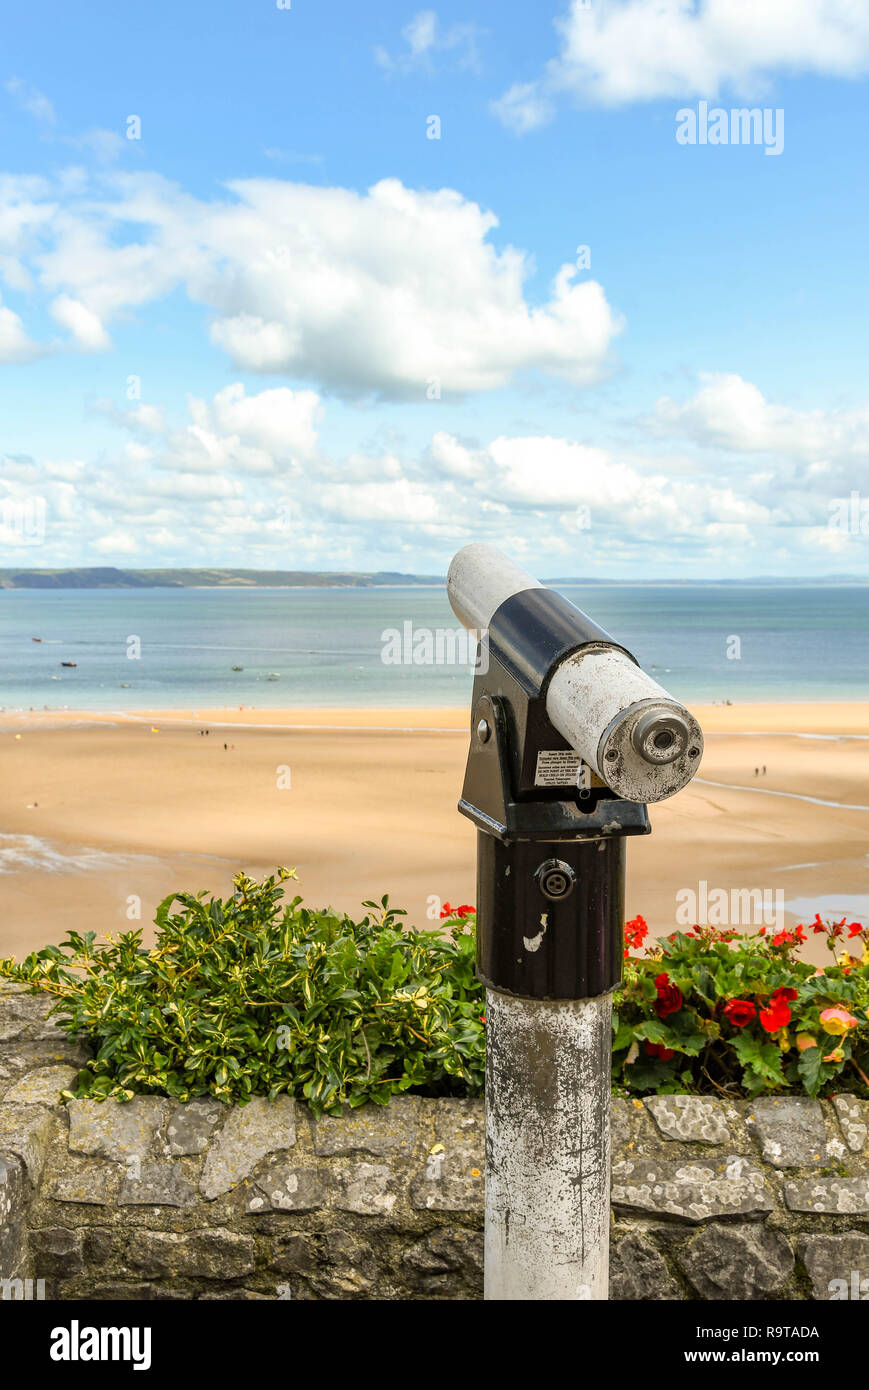 TENBY, PEMBROKESHIRE, WALES - AUGUST 2018: Coin-operated binoculars for visitors to view the scenery in Tenby, West Wales. Stock Photo